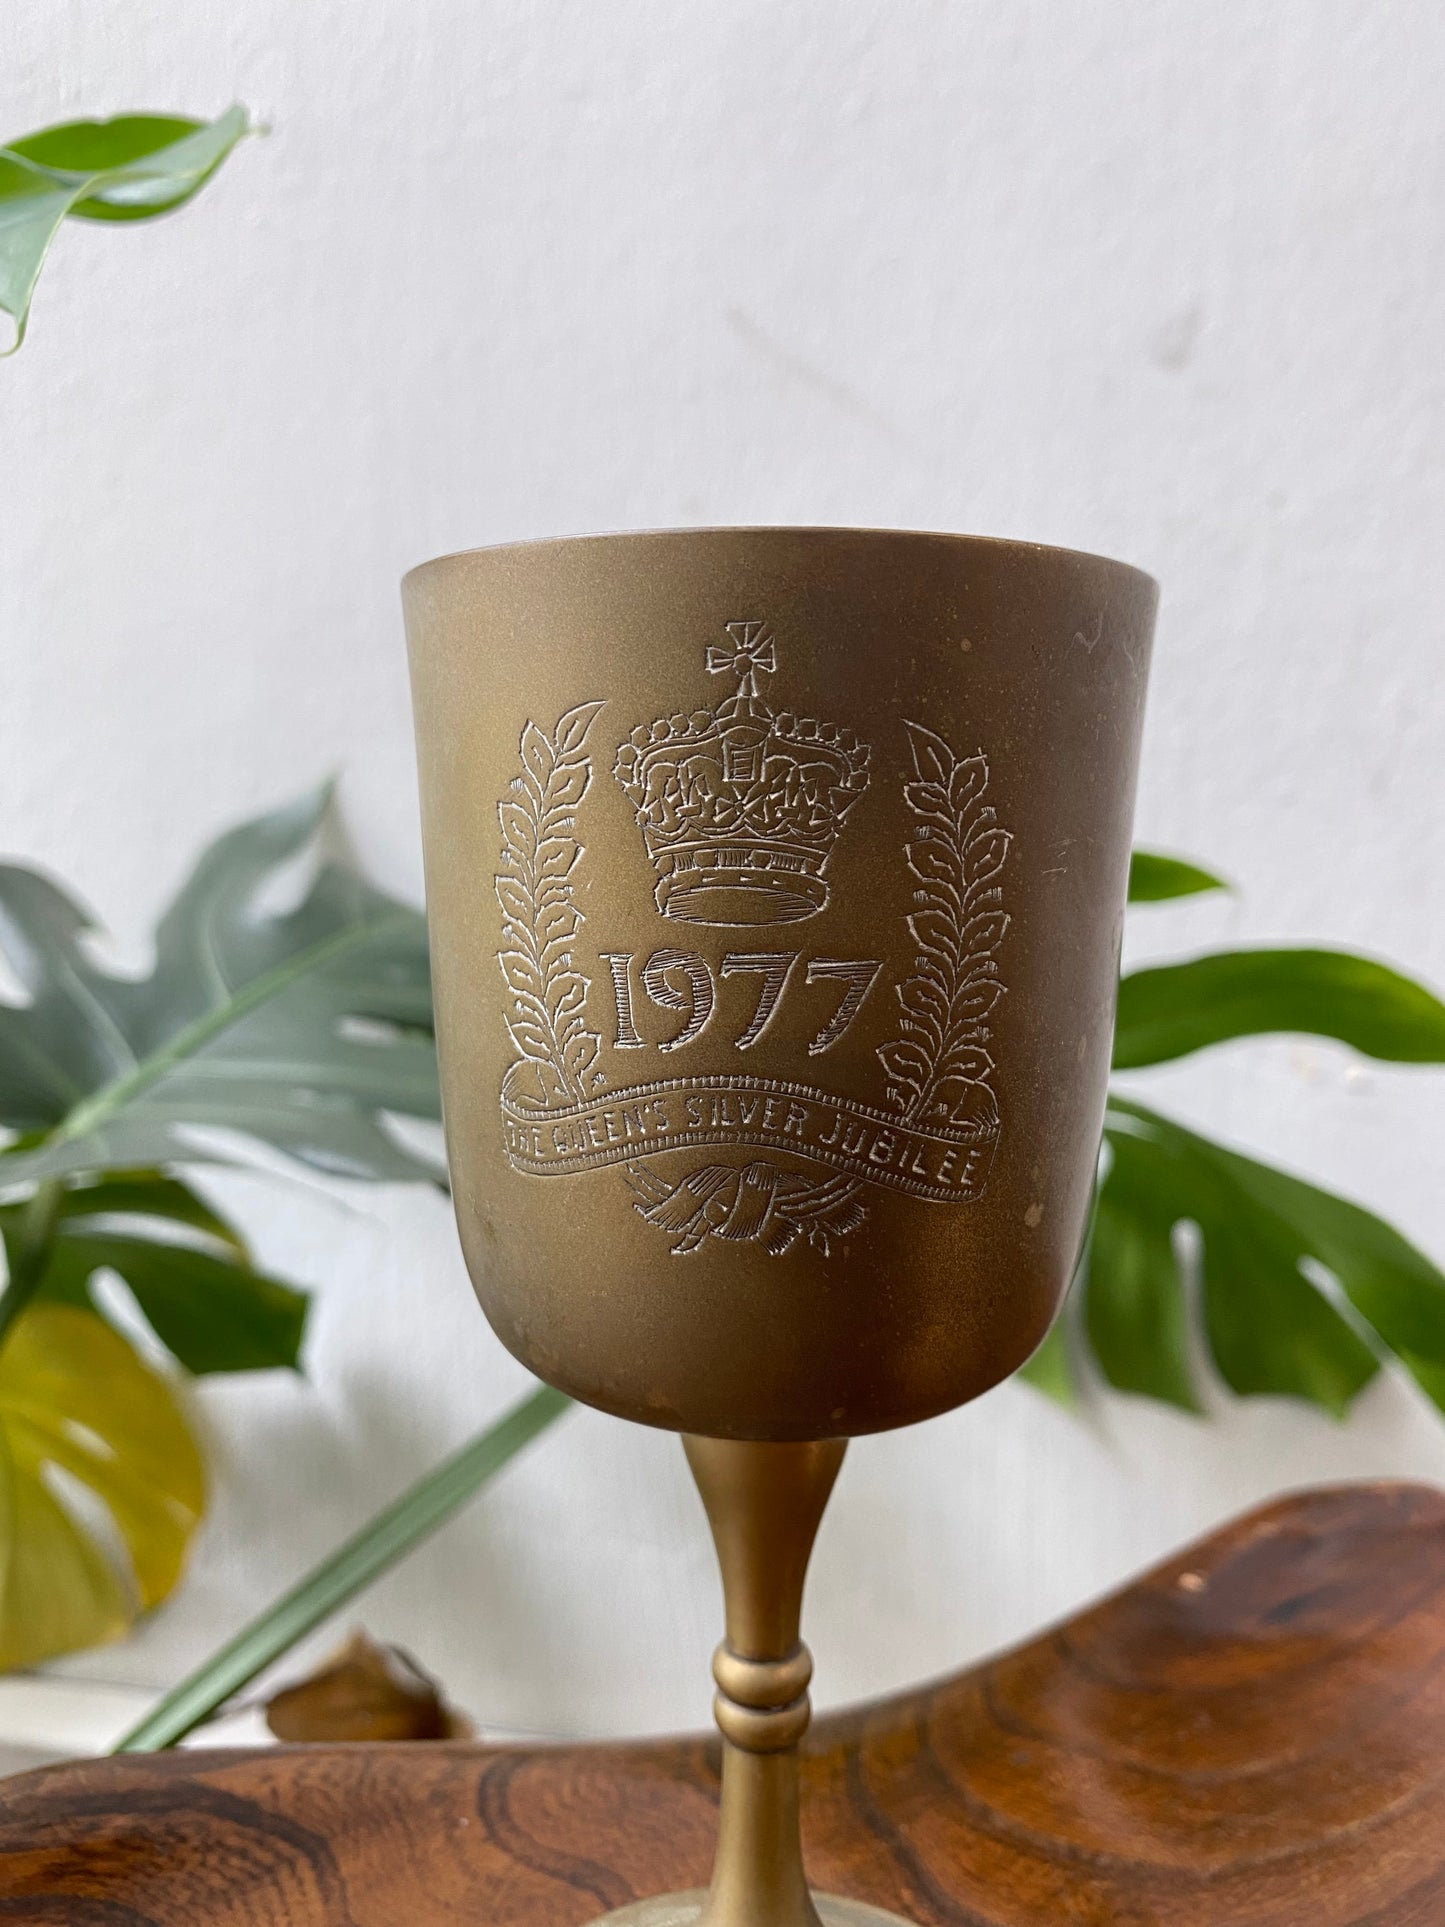 The Queen's Silver Jubilee Goblet